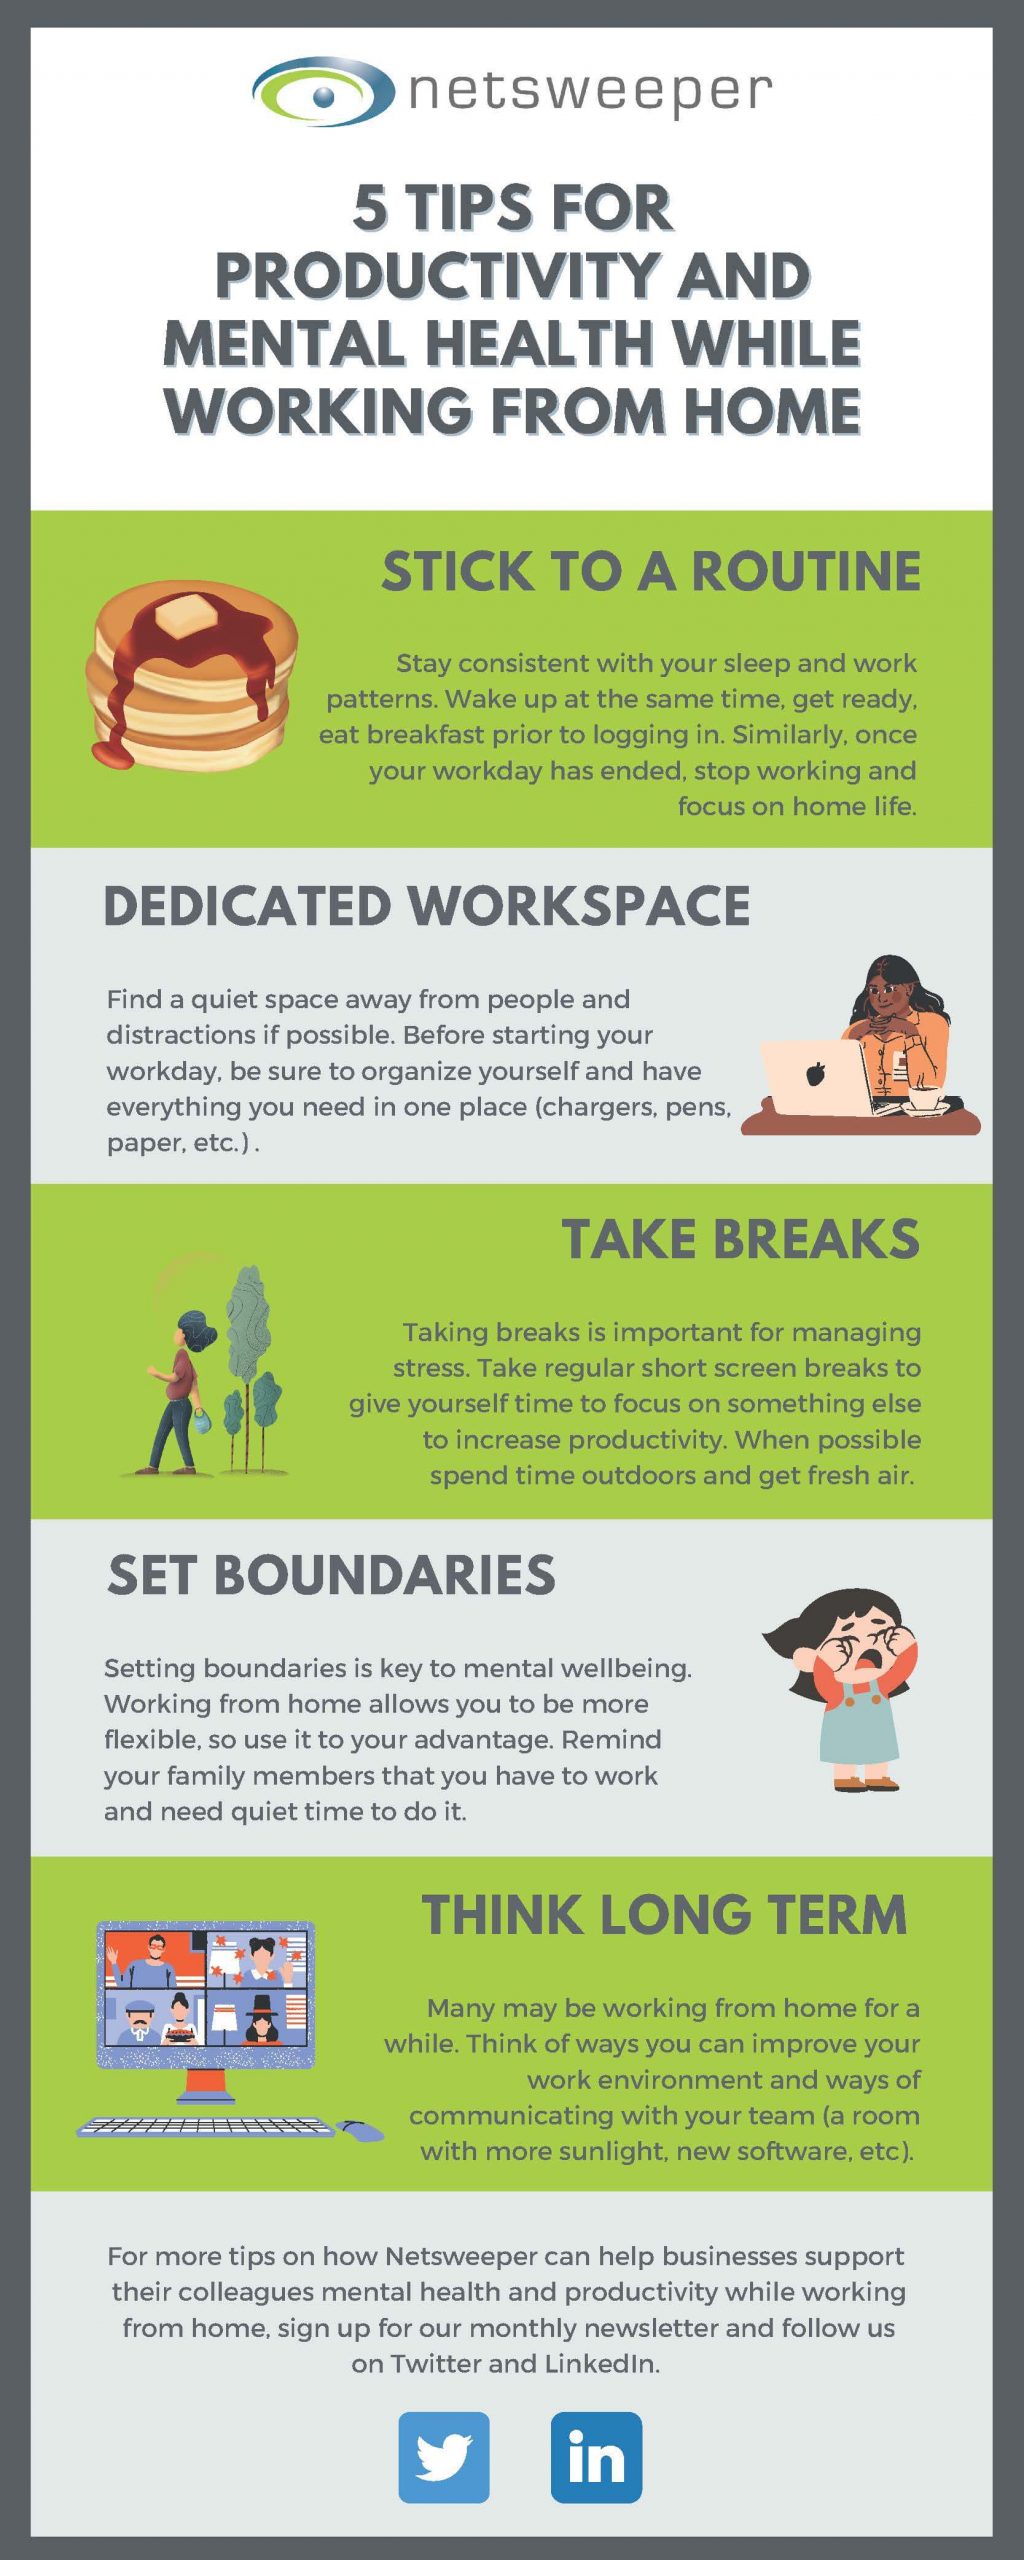 [Infographic] Mental Health Tips While Working from Home